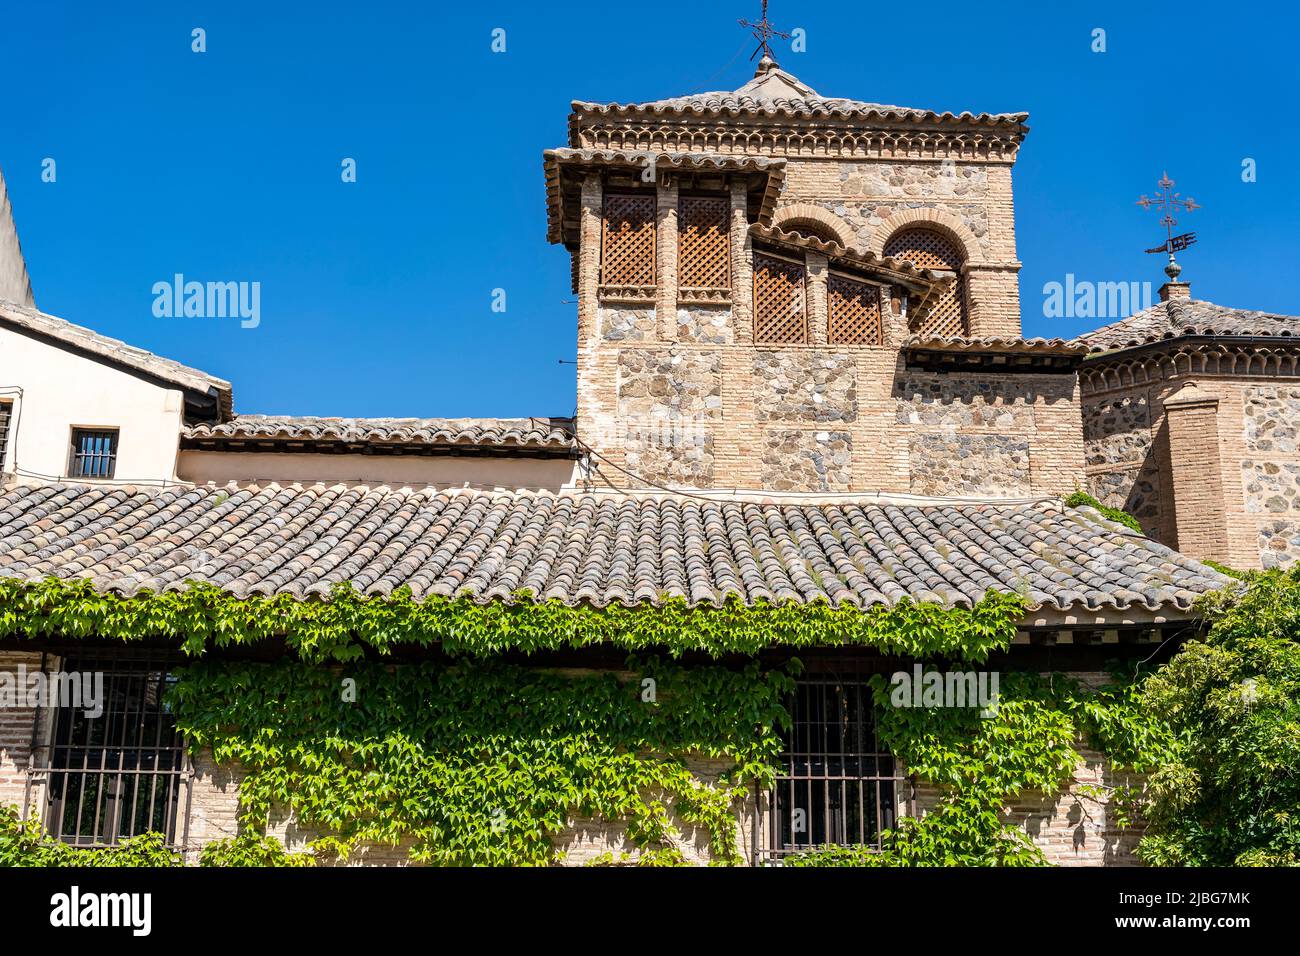 El Greco museum in Toledo, an ancient city set on a hill above the plains of Castilla-La Mancha in central Spain. A UNESCO World Heritage Site. Stock Photo